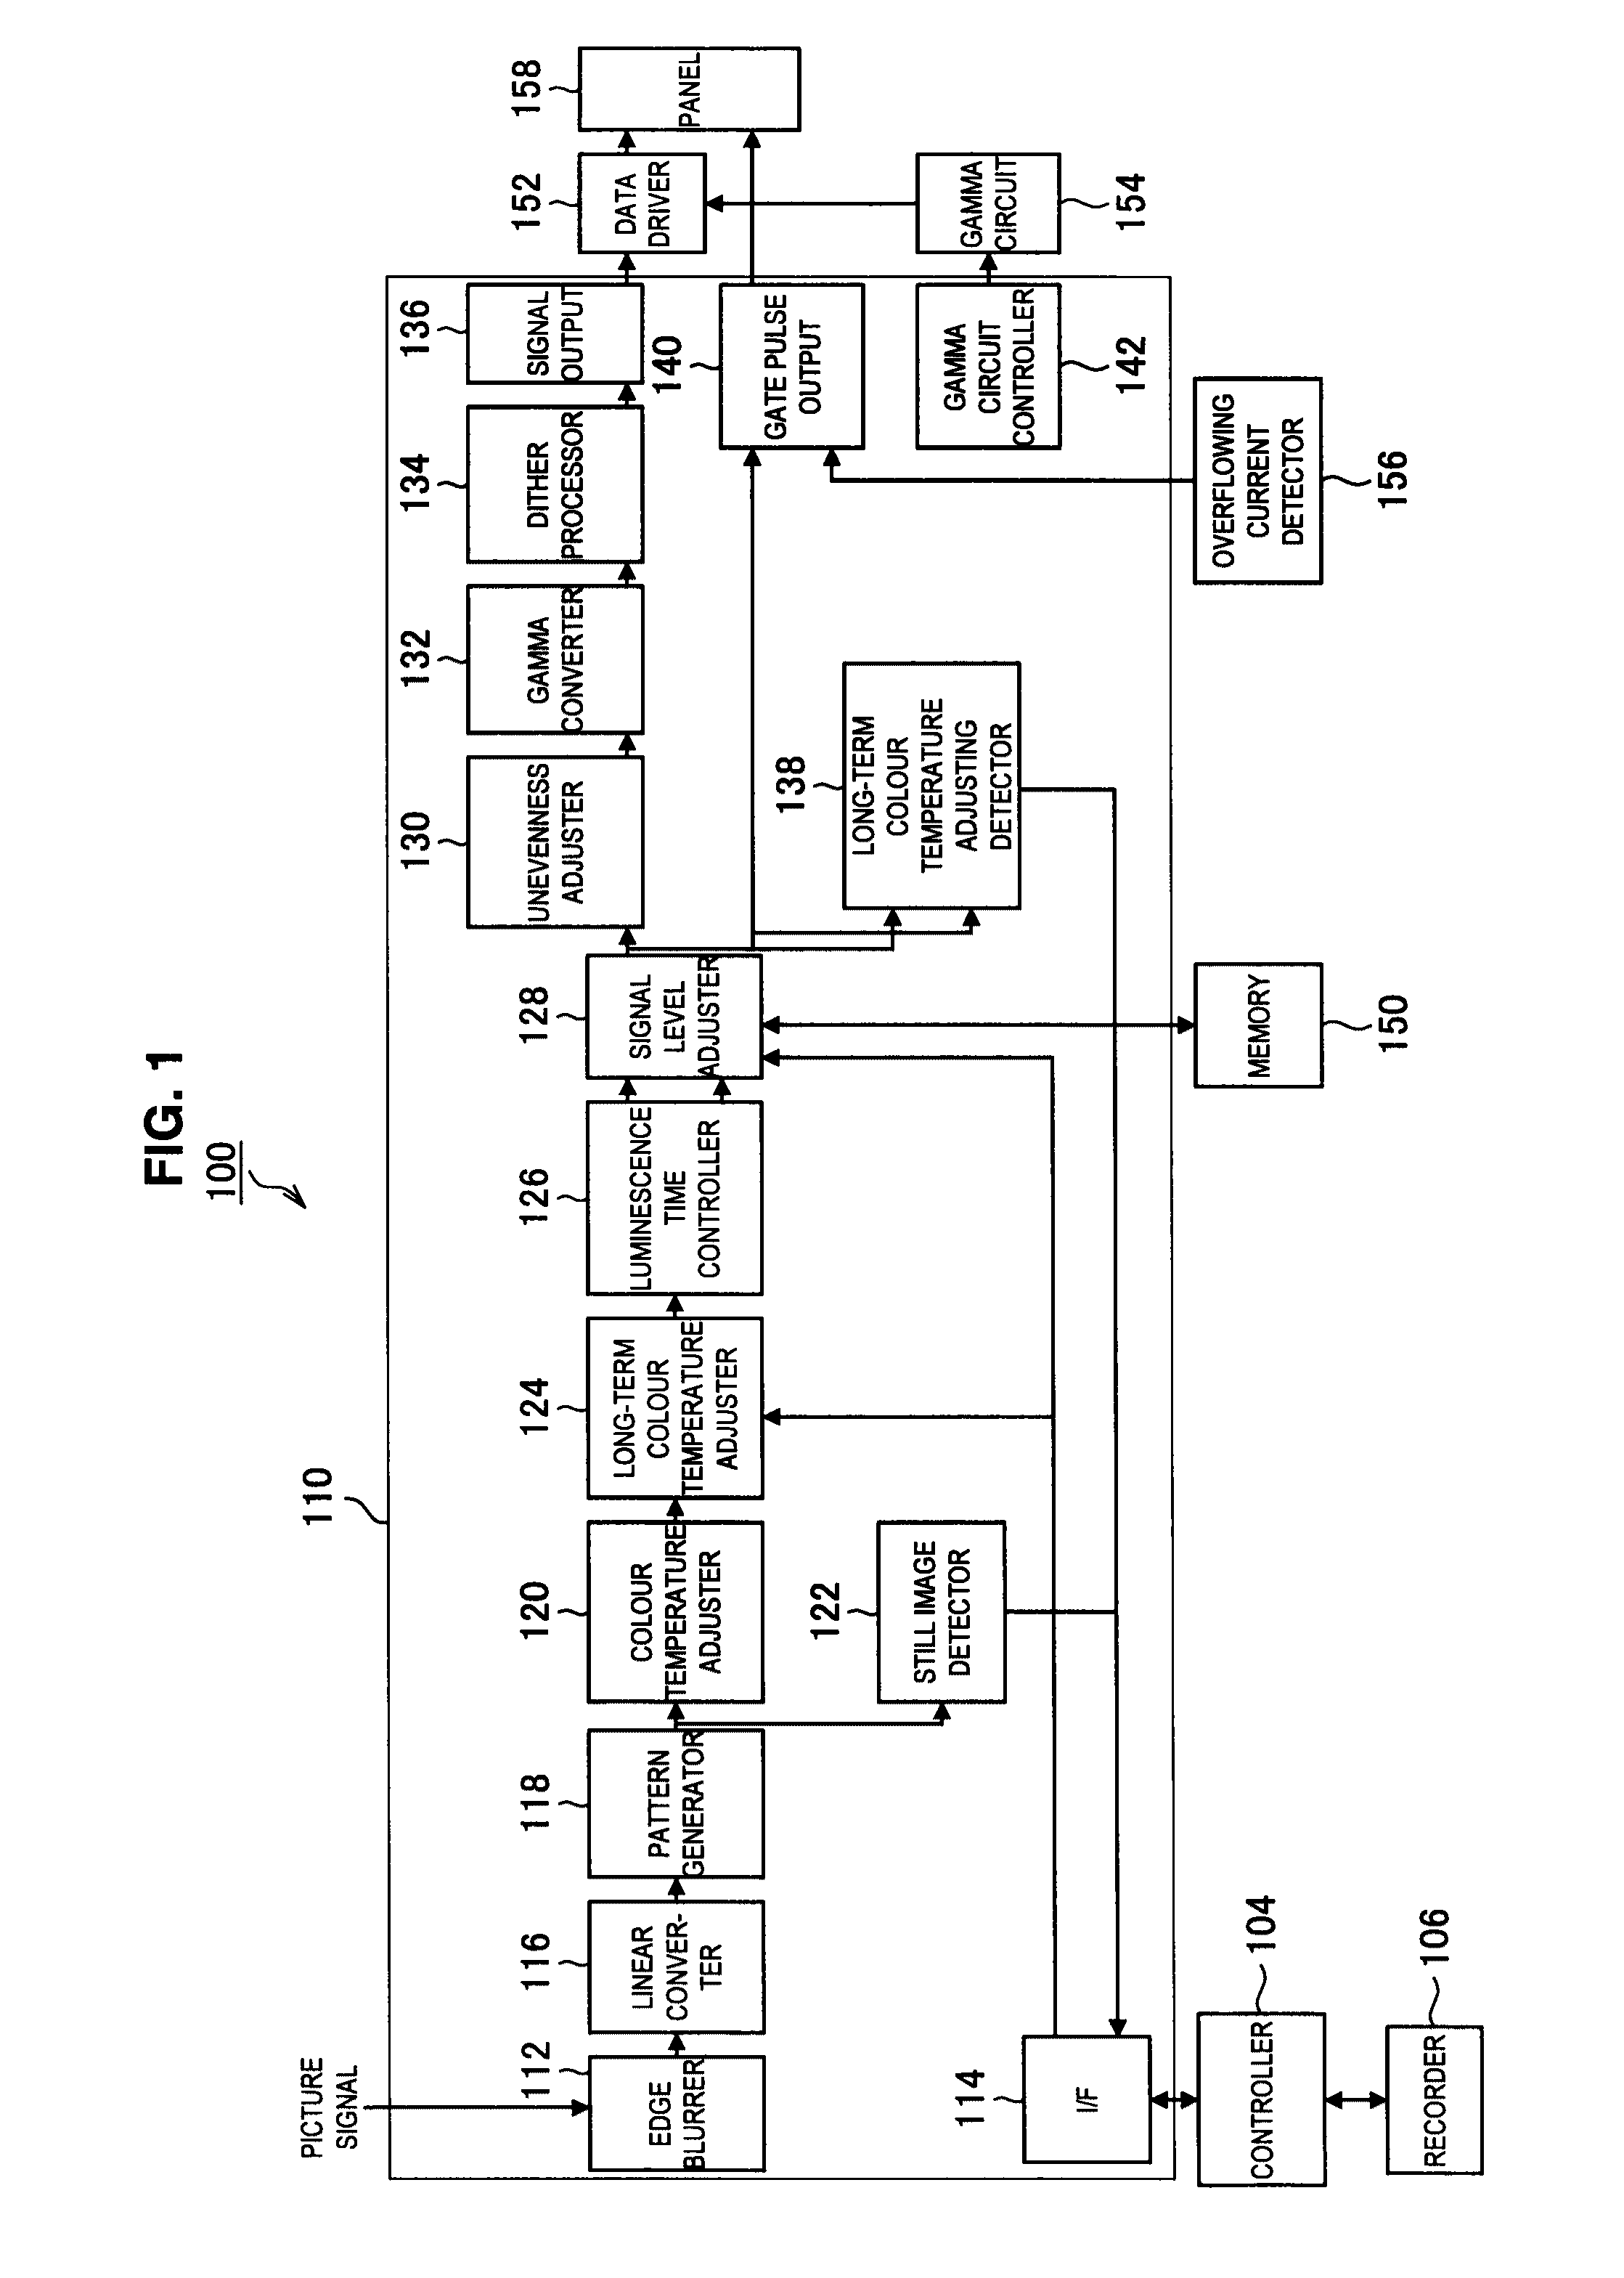 Display device, picture signal processing method, and program